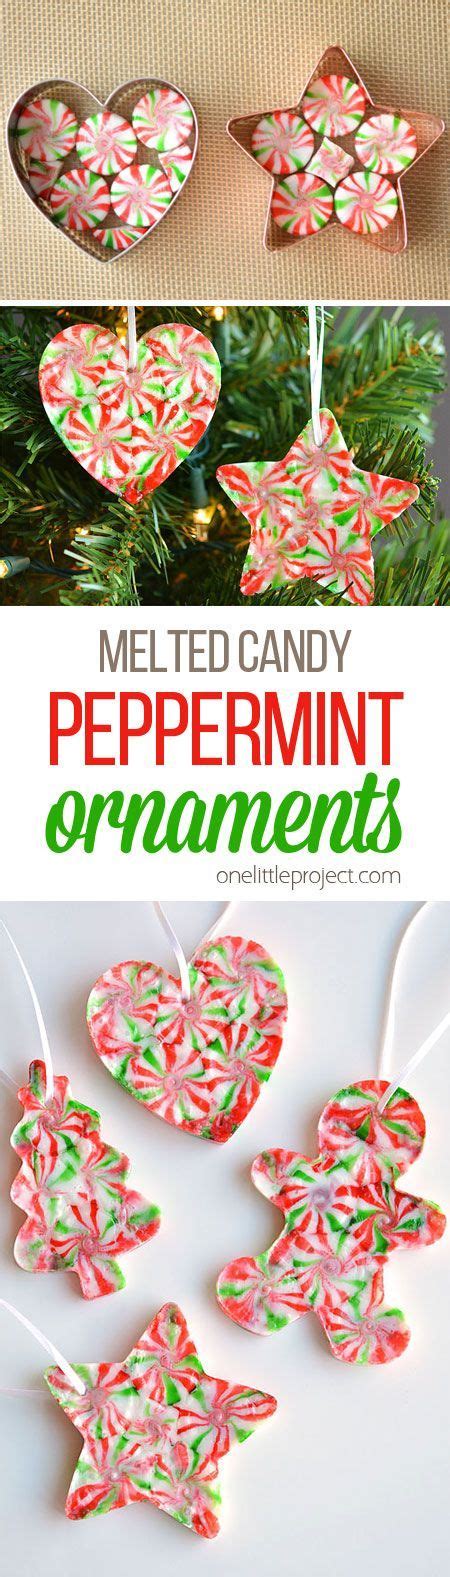 Diy Crafts These Melted Peppermint Candy Ornaments Are Adorable And